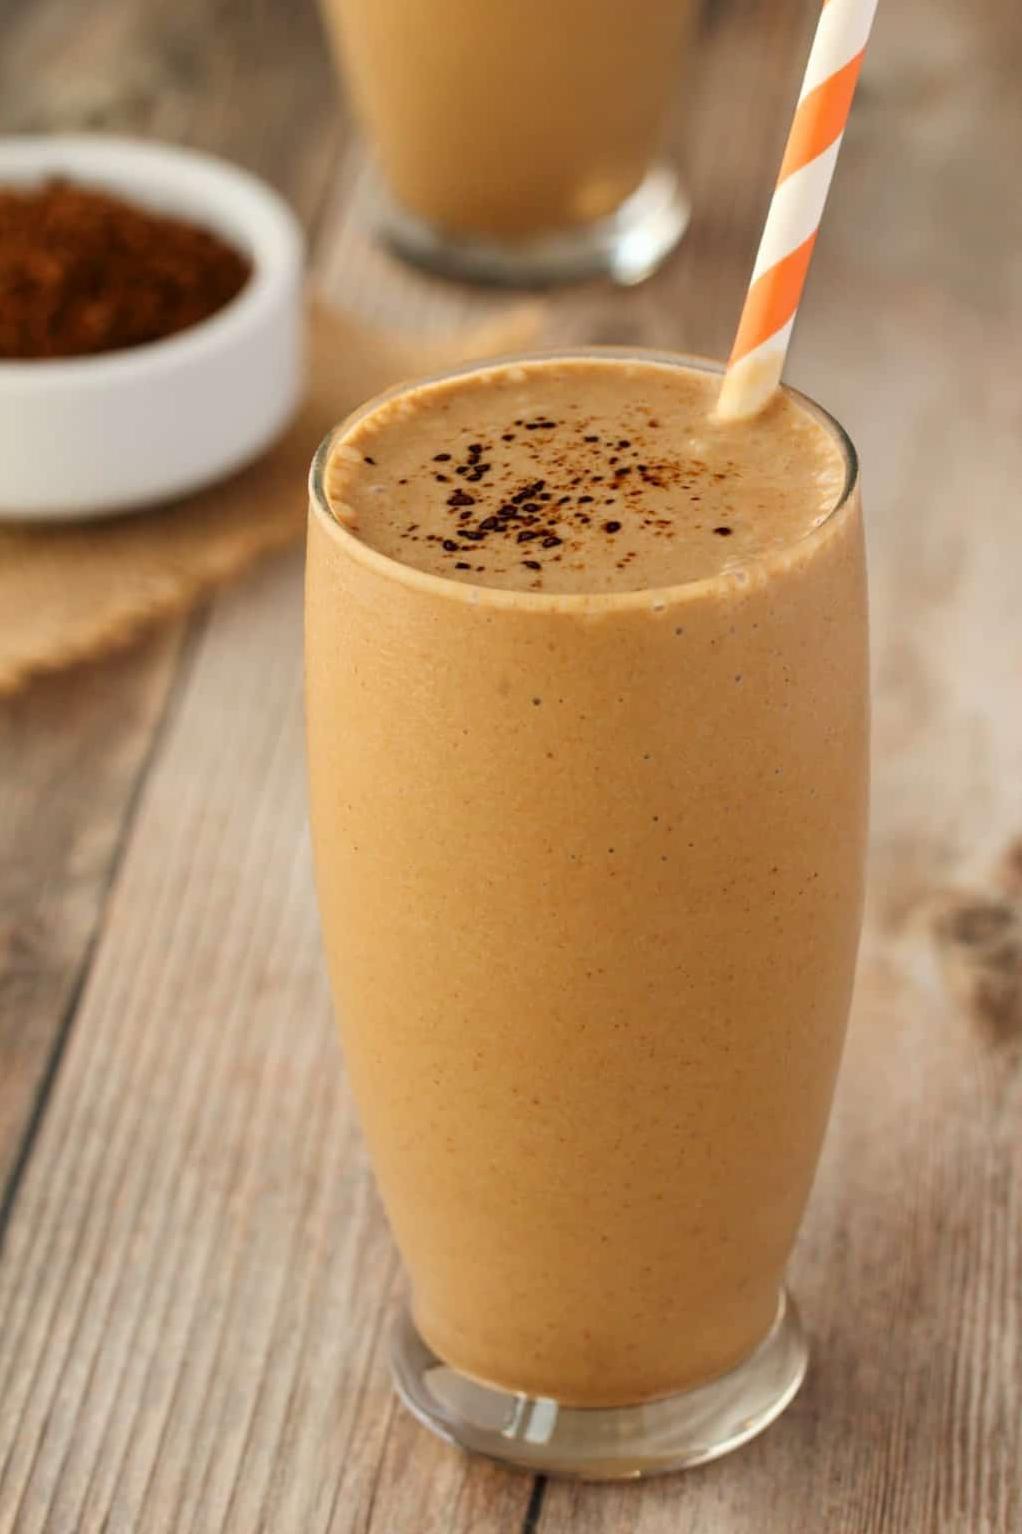  Give your taste buds a party with this delicious blend of coffee, almond milk, and ice.